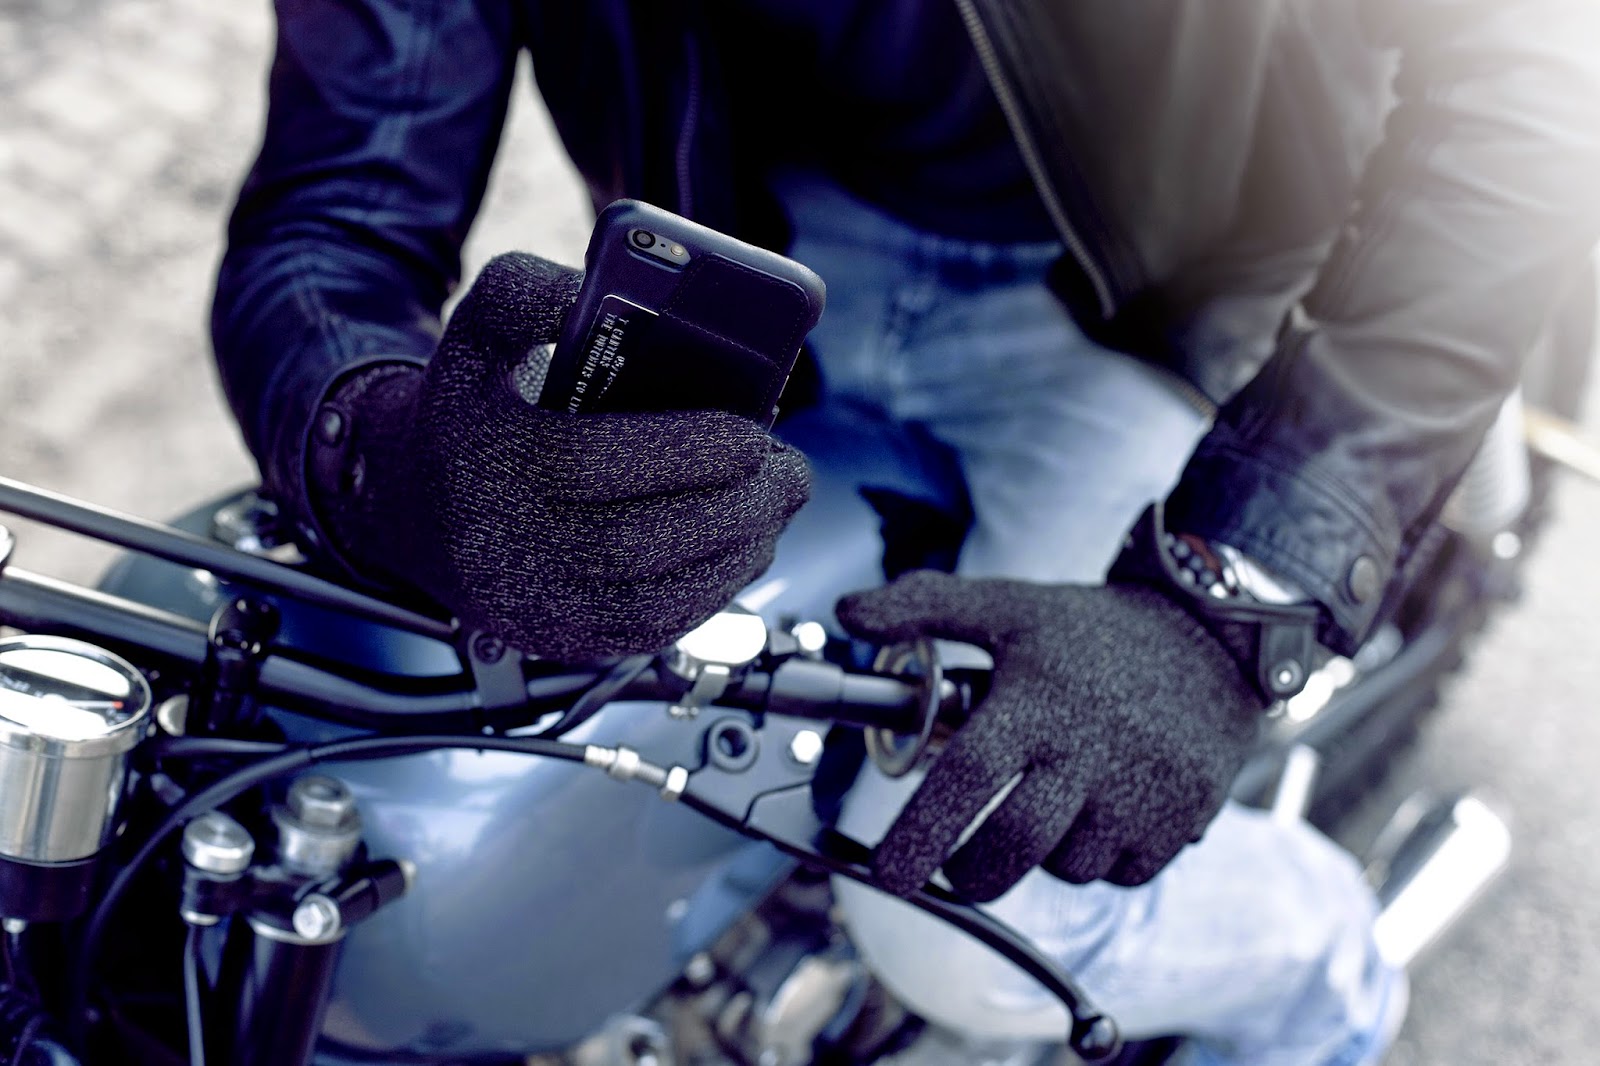 stylish gloves for touchscreens